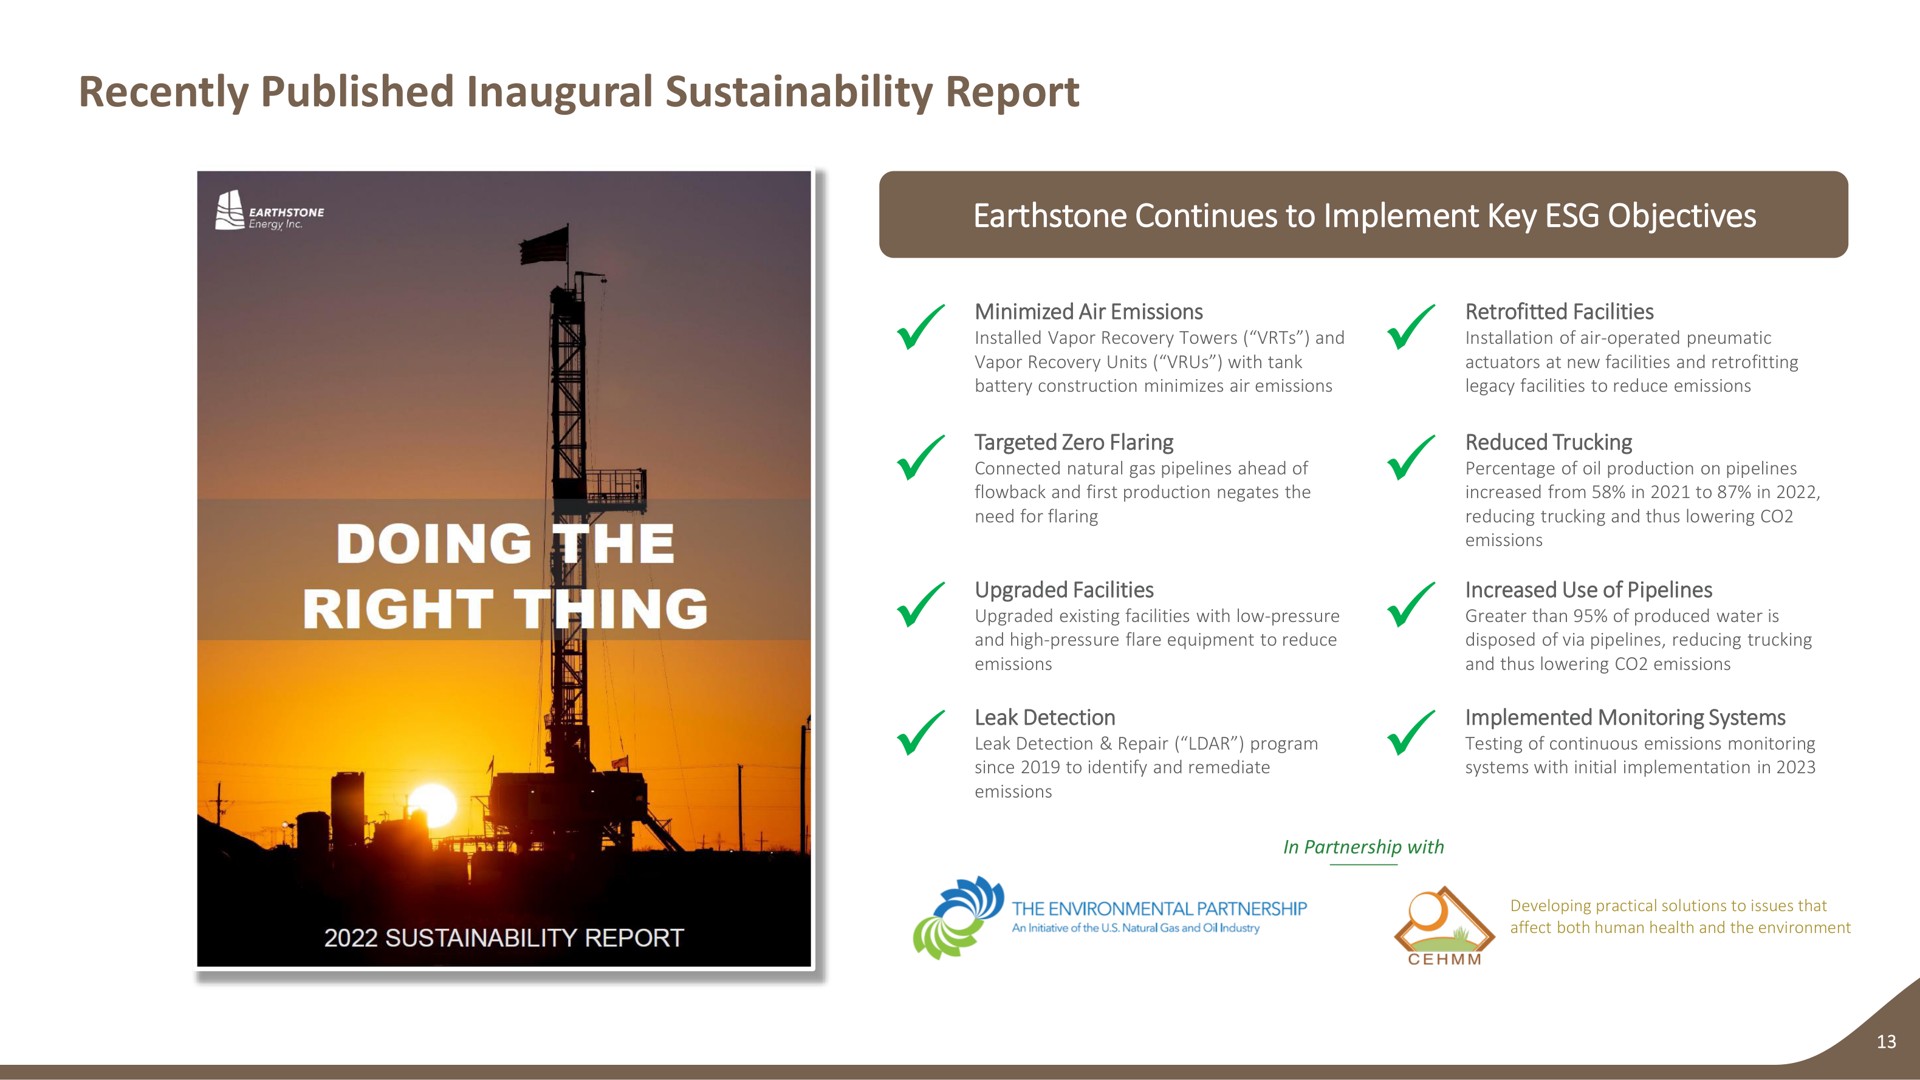 recently published inaugural report continues to implement key objectives minimized air emissions facilities targeted zero flaring reduced trucking upgraded facilities increased use of pipelines leak detection implemented monitoring systems doing the | Earthstone Energy